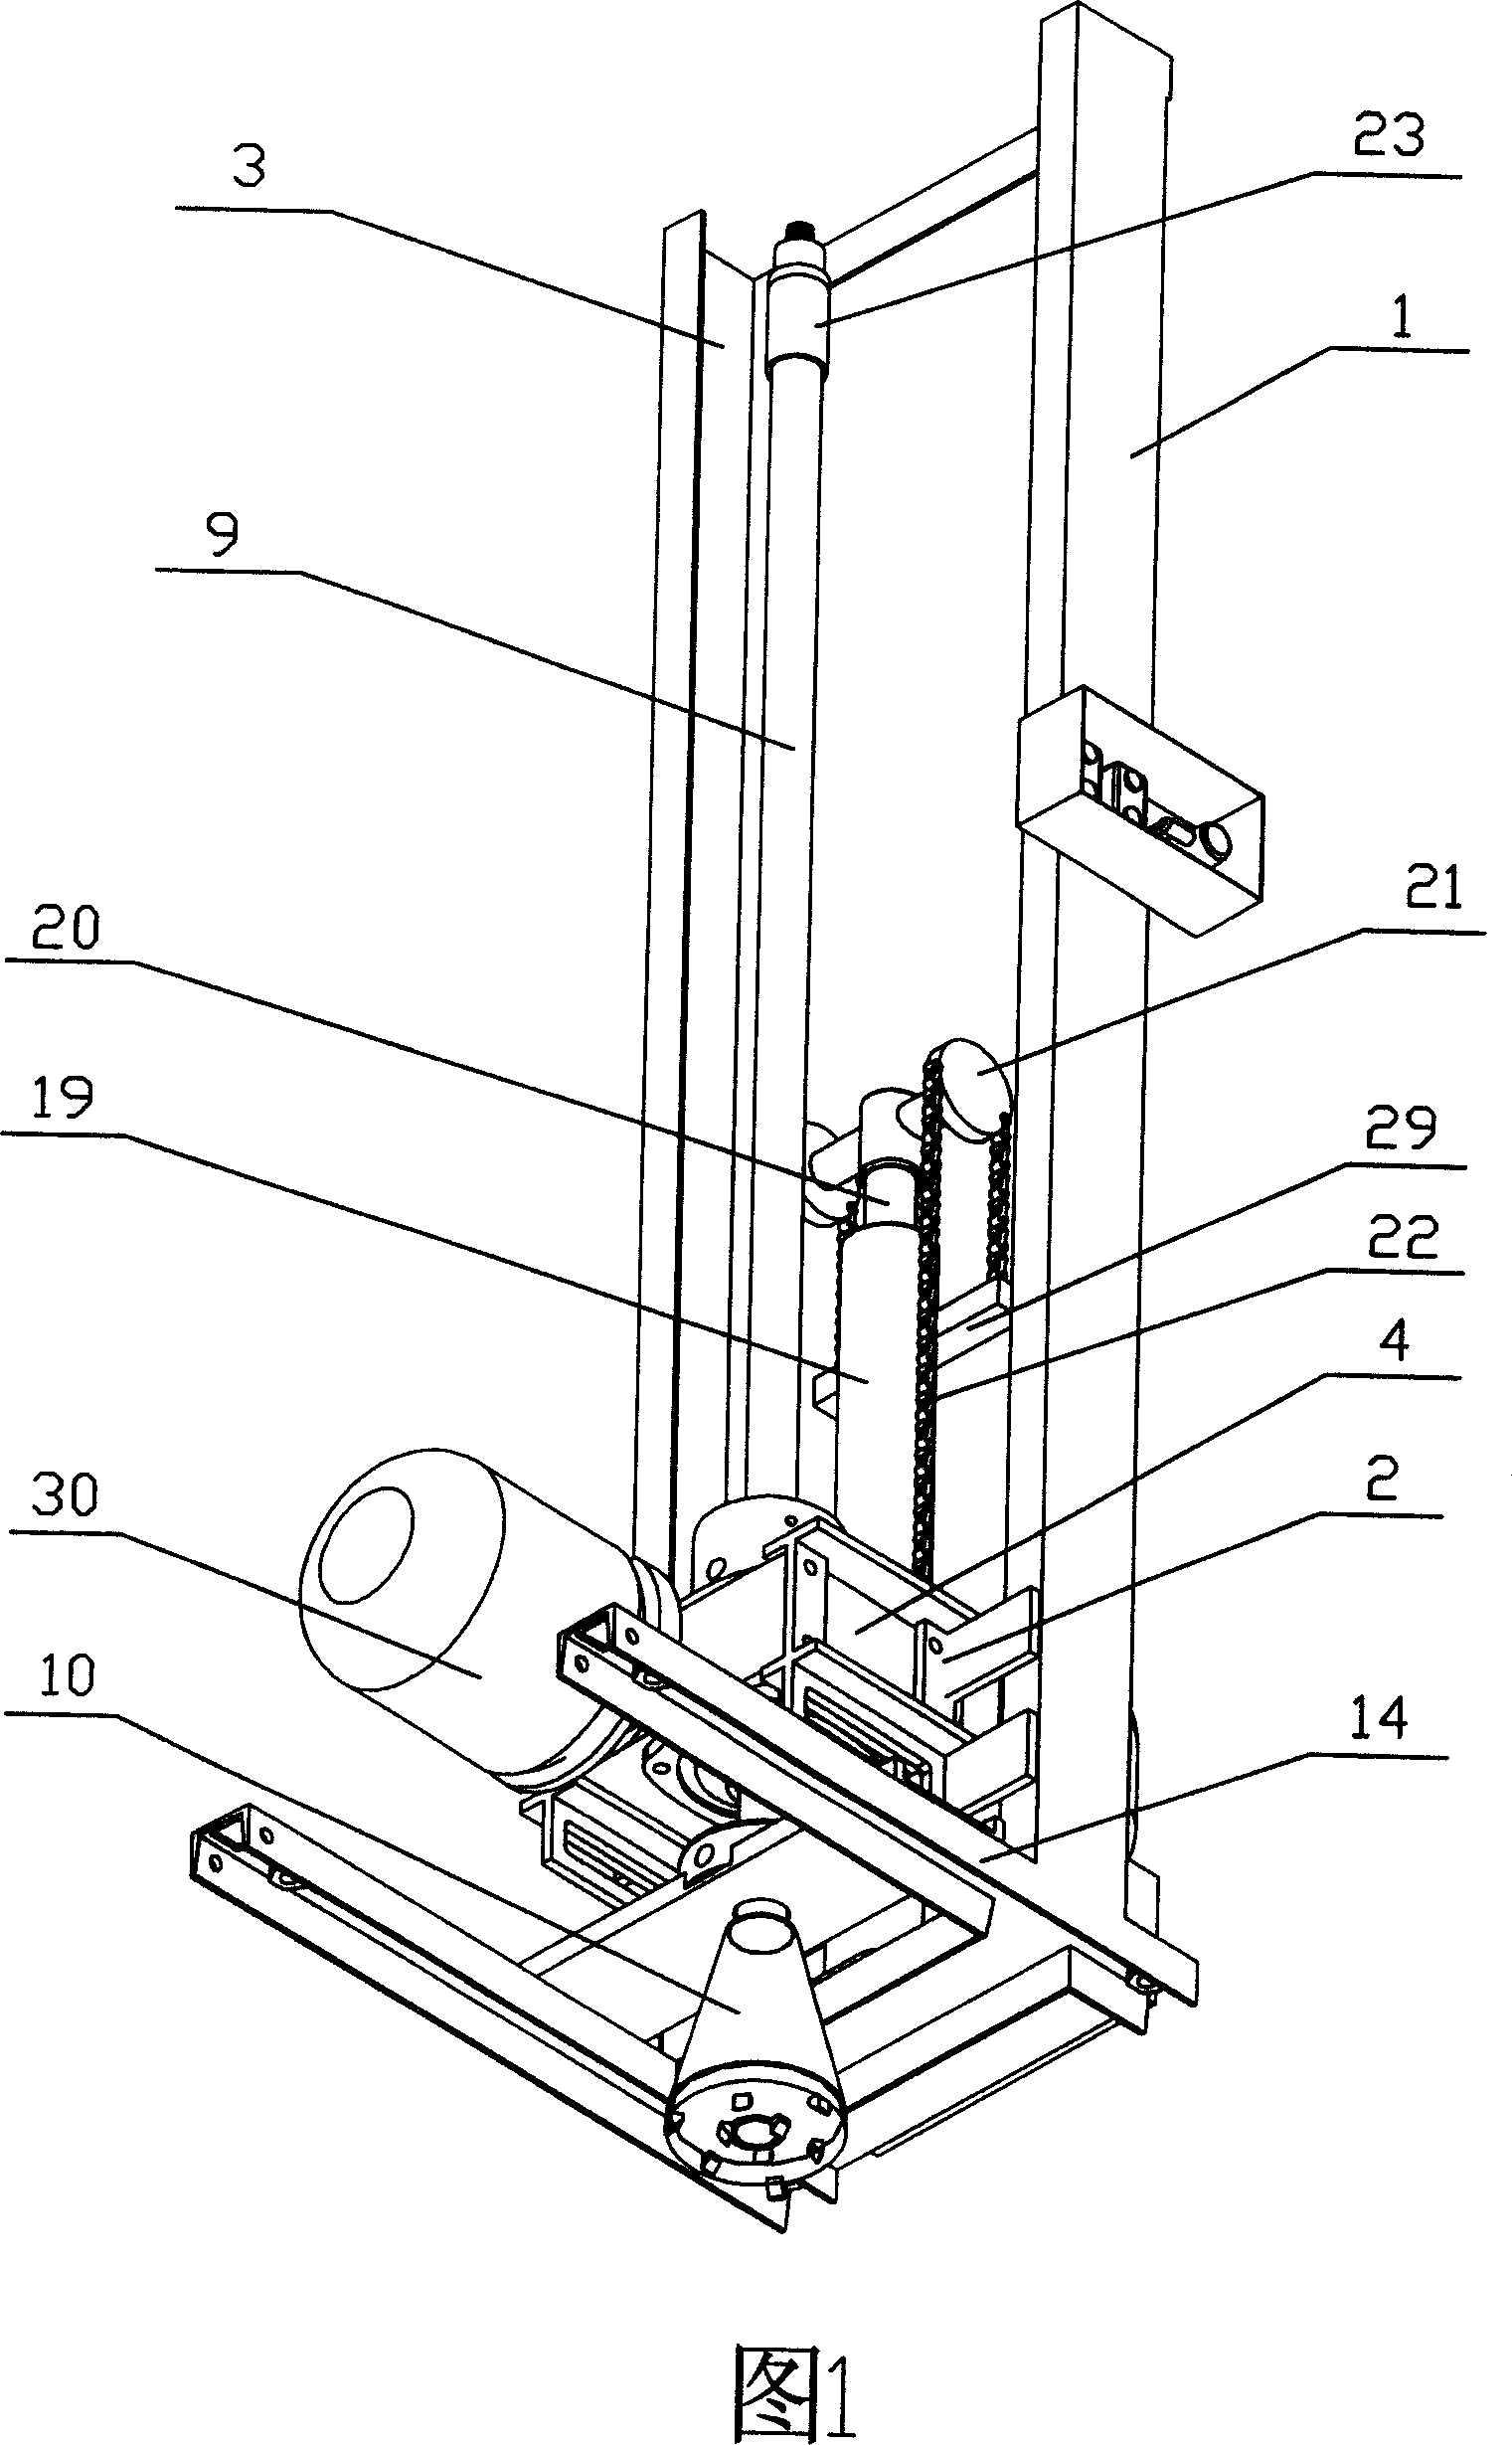 Portable well-digging machine